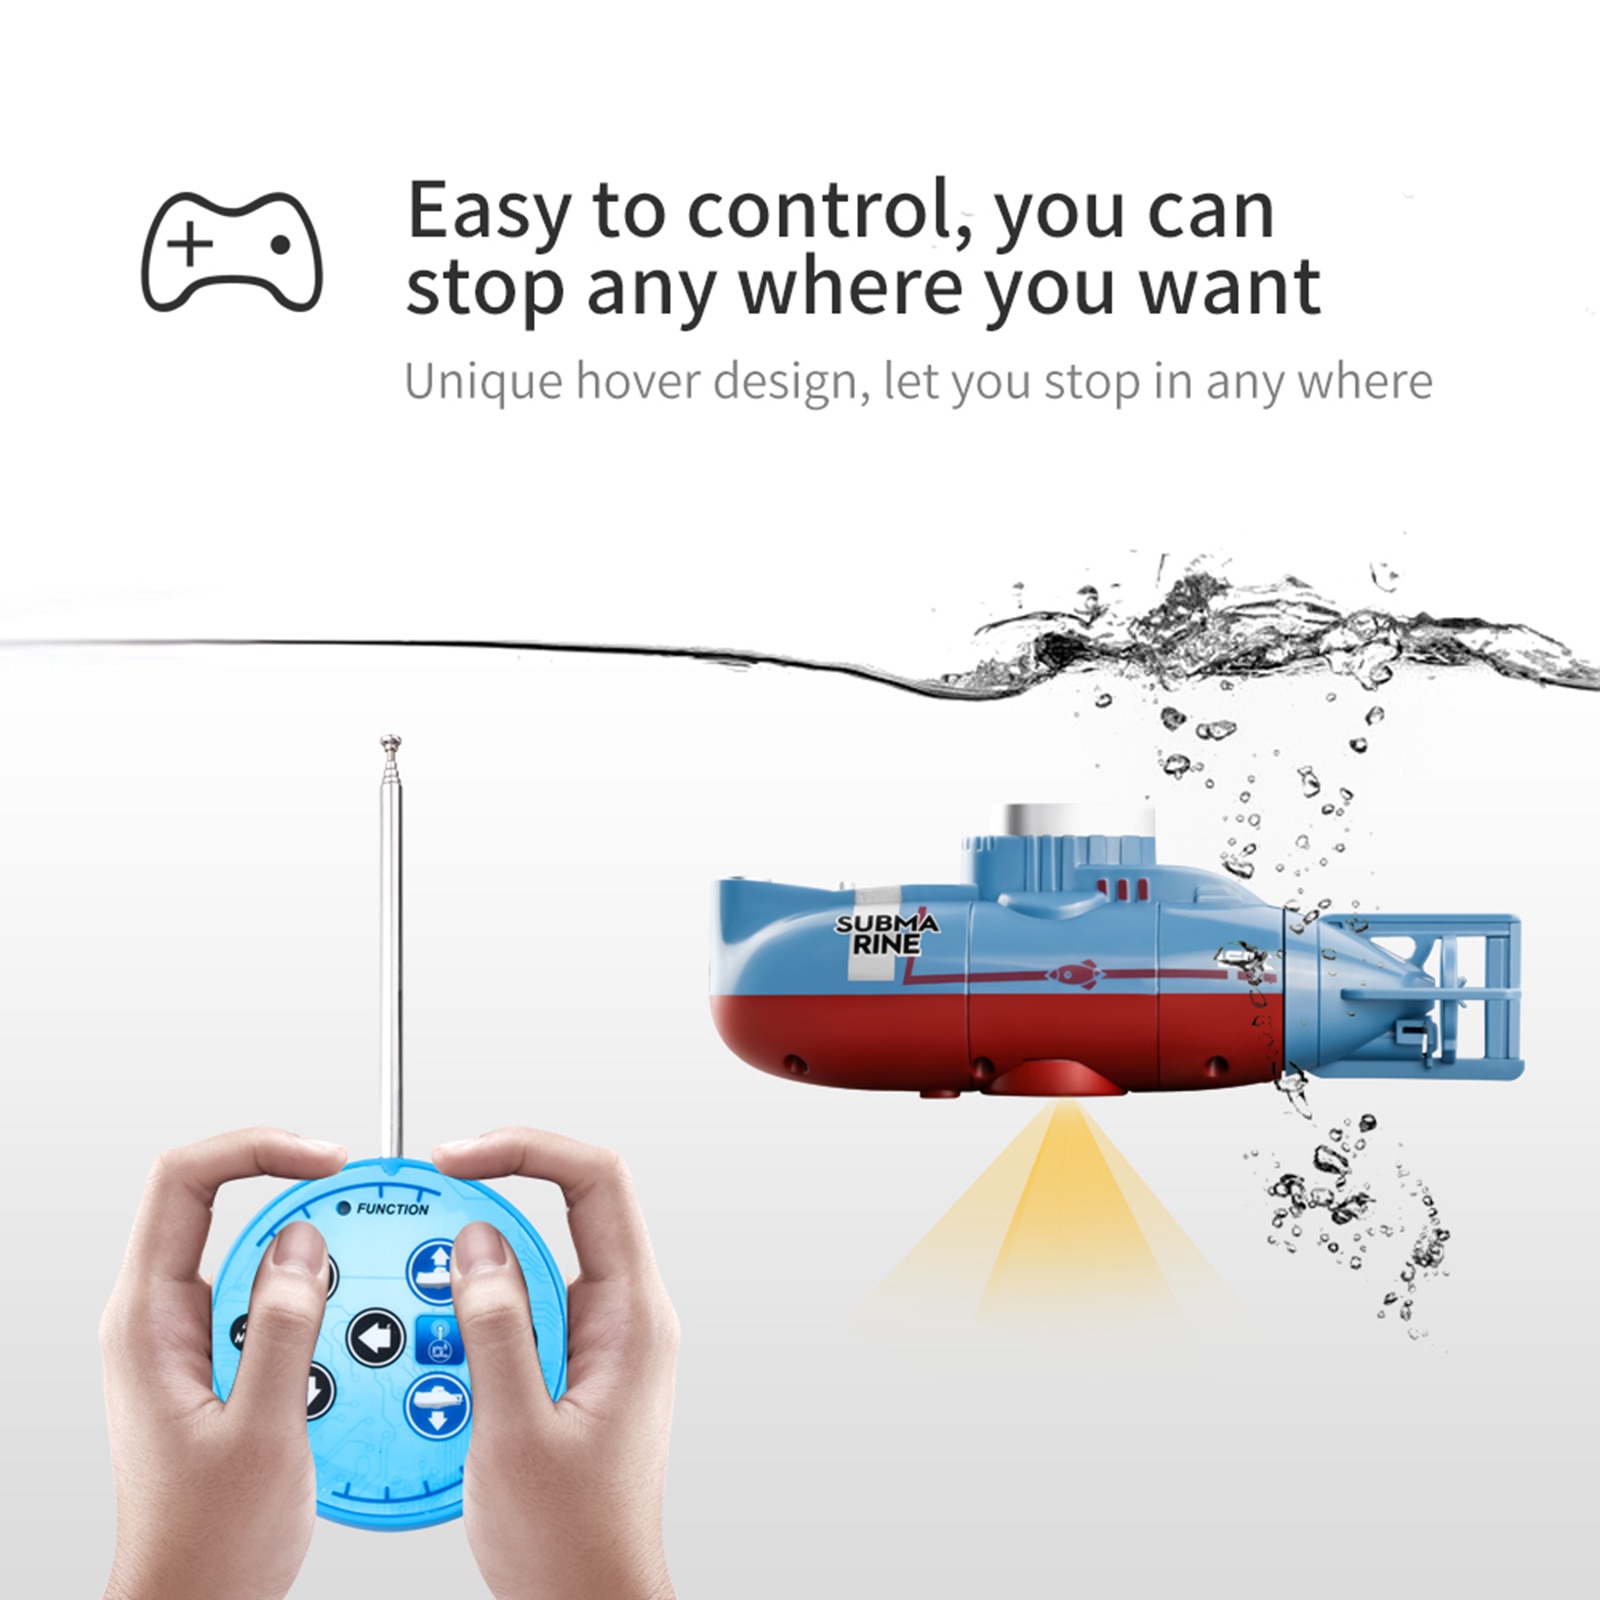 Mini RC Submarine 0.1m/s Speed Remote Control Boat Waterproof Diving Toy Simulation Ship Model Gift Toy for Kids Boys Girls Gift